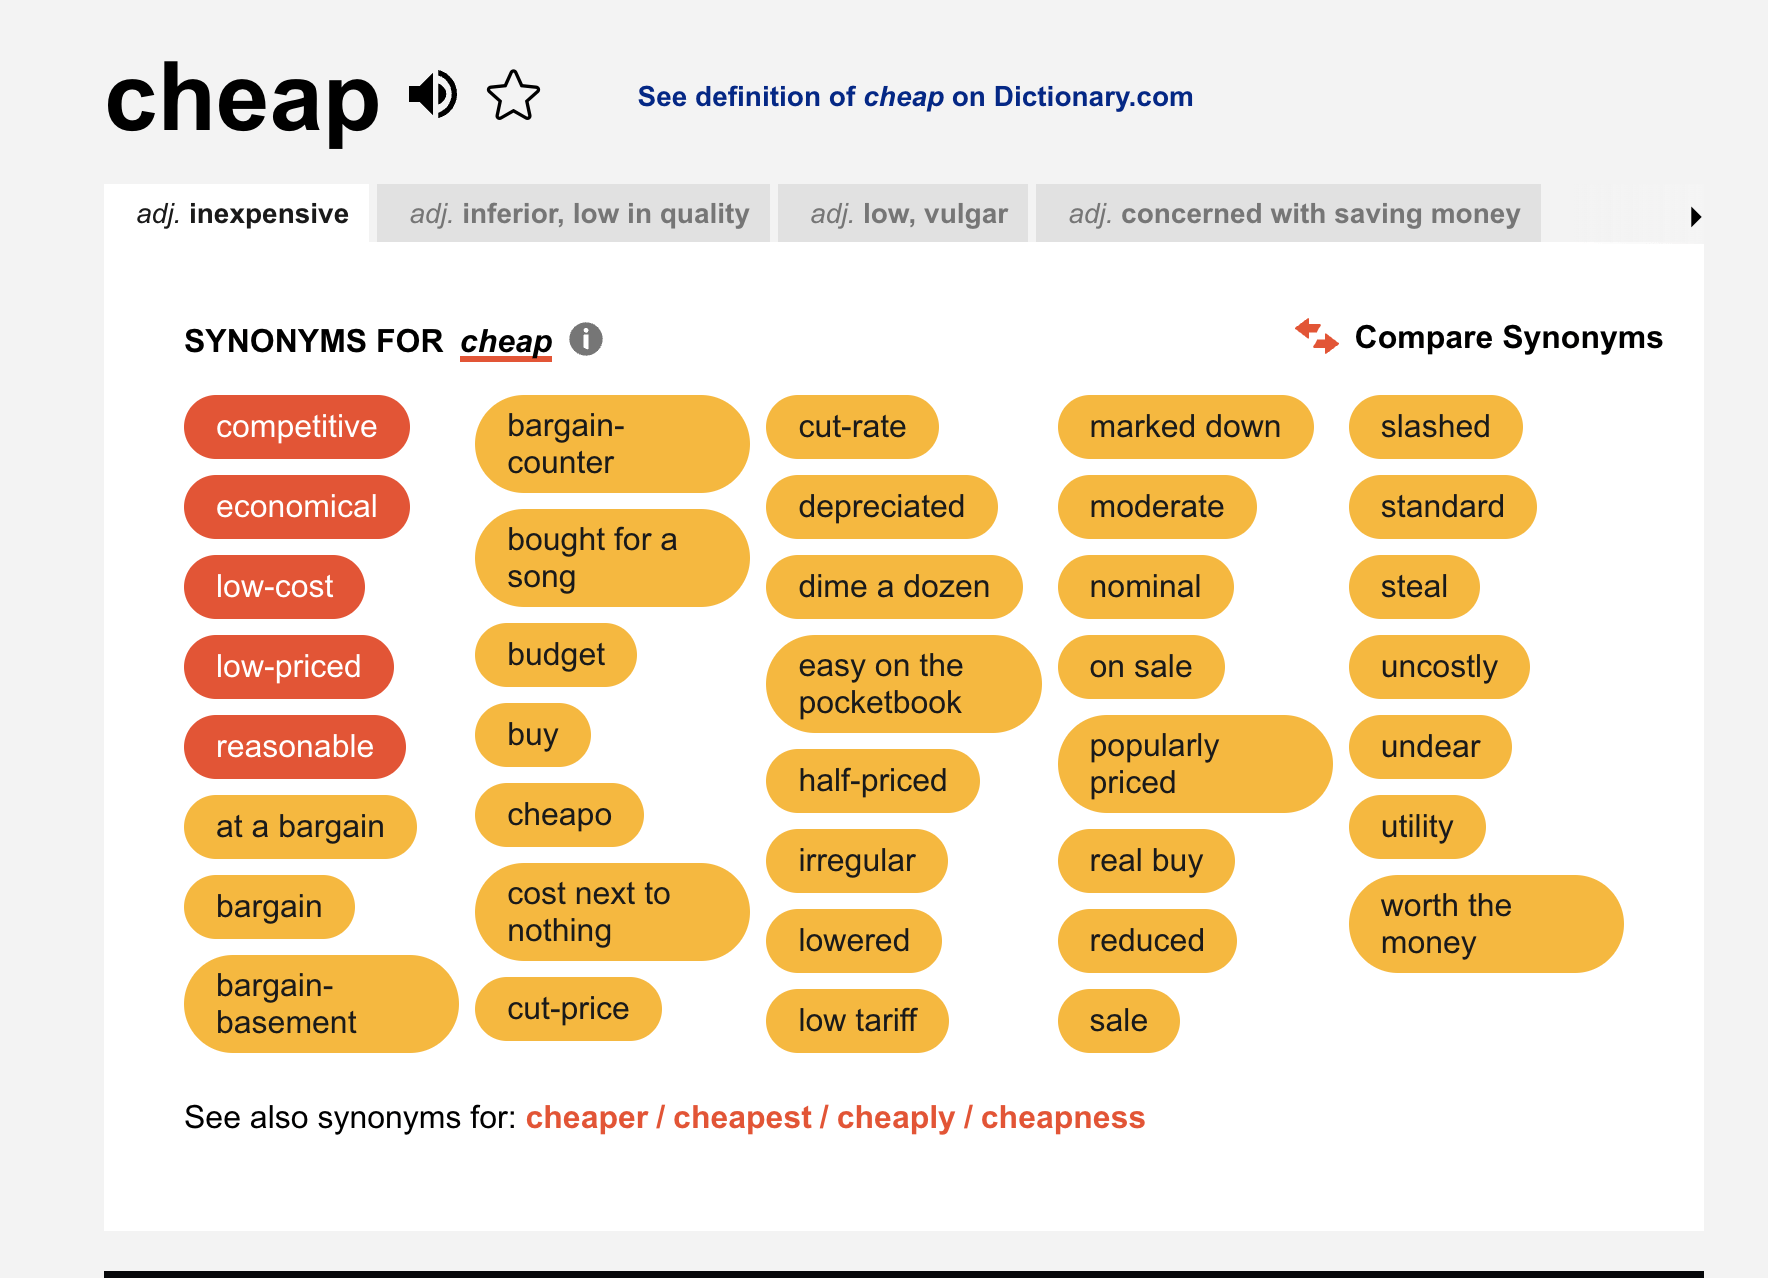 A search for the word Cheap on Thesaurus.com yields lots of great results